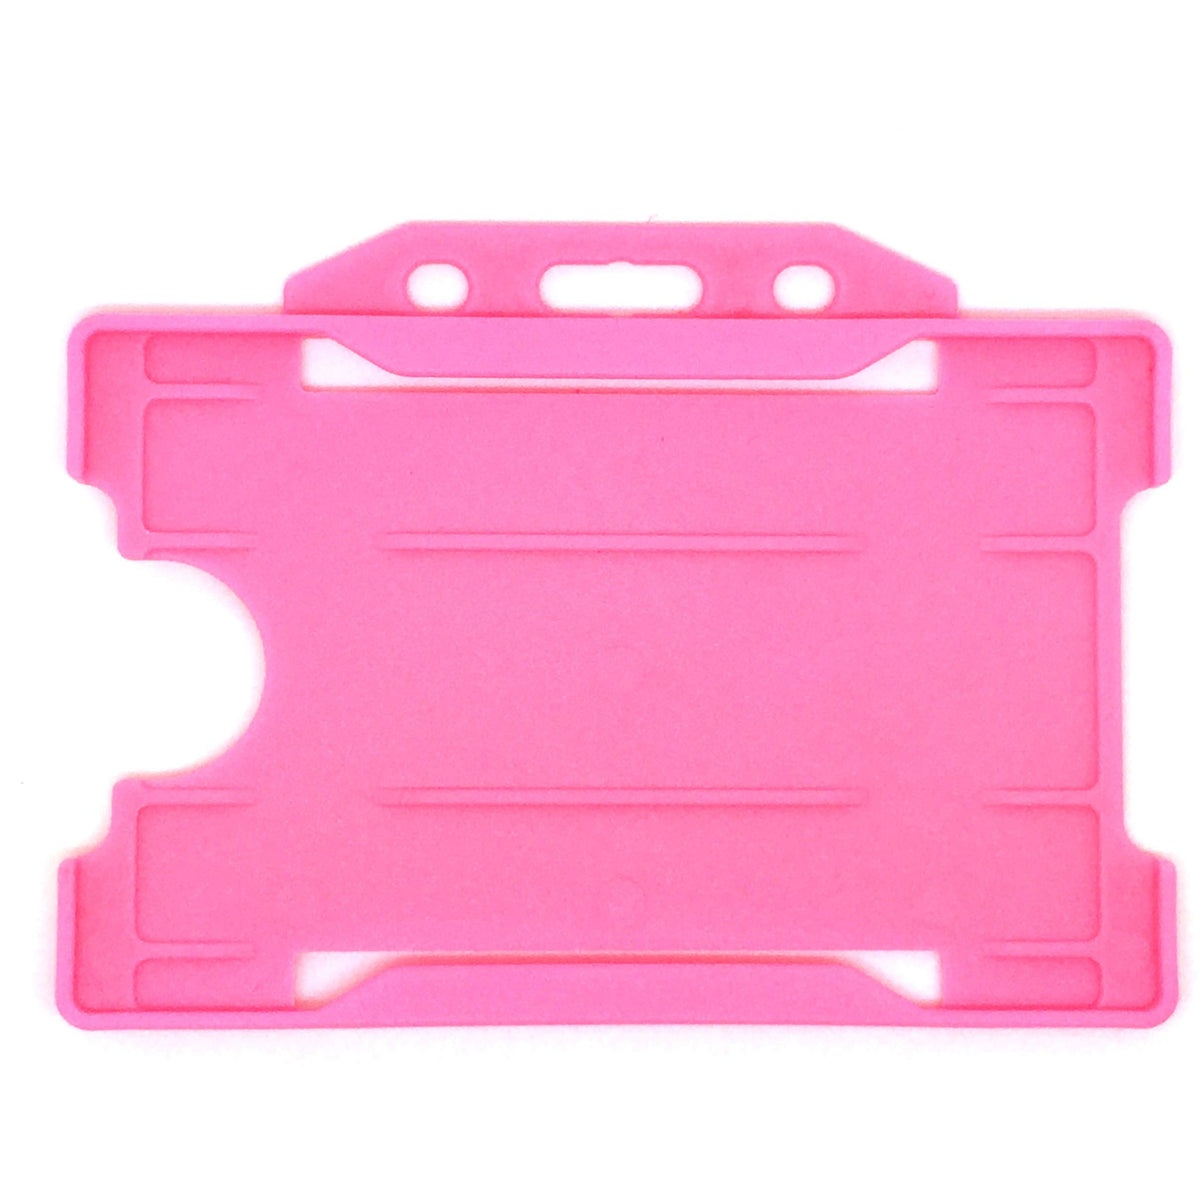 ALG ID Cards - Single Identity Card Pass Badge Holder (Pink)